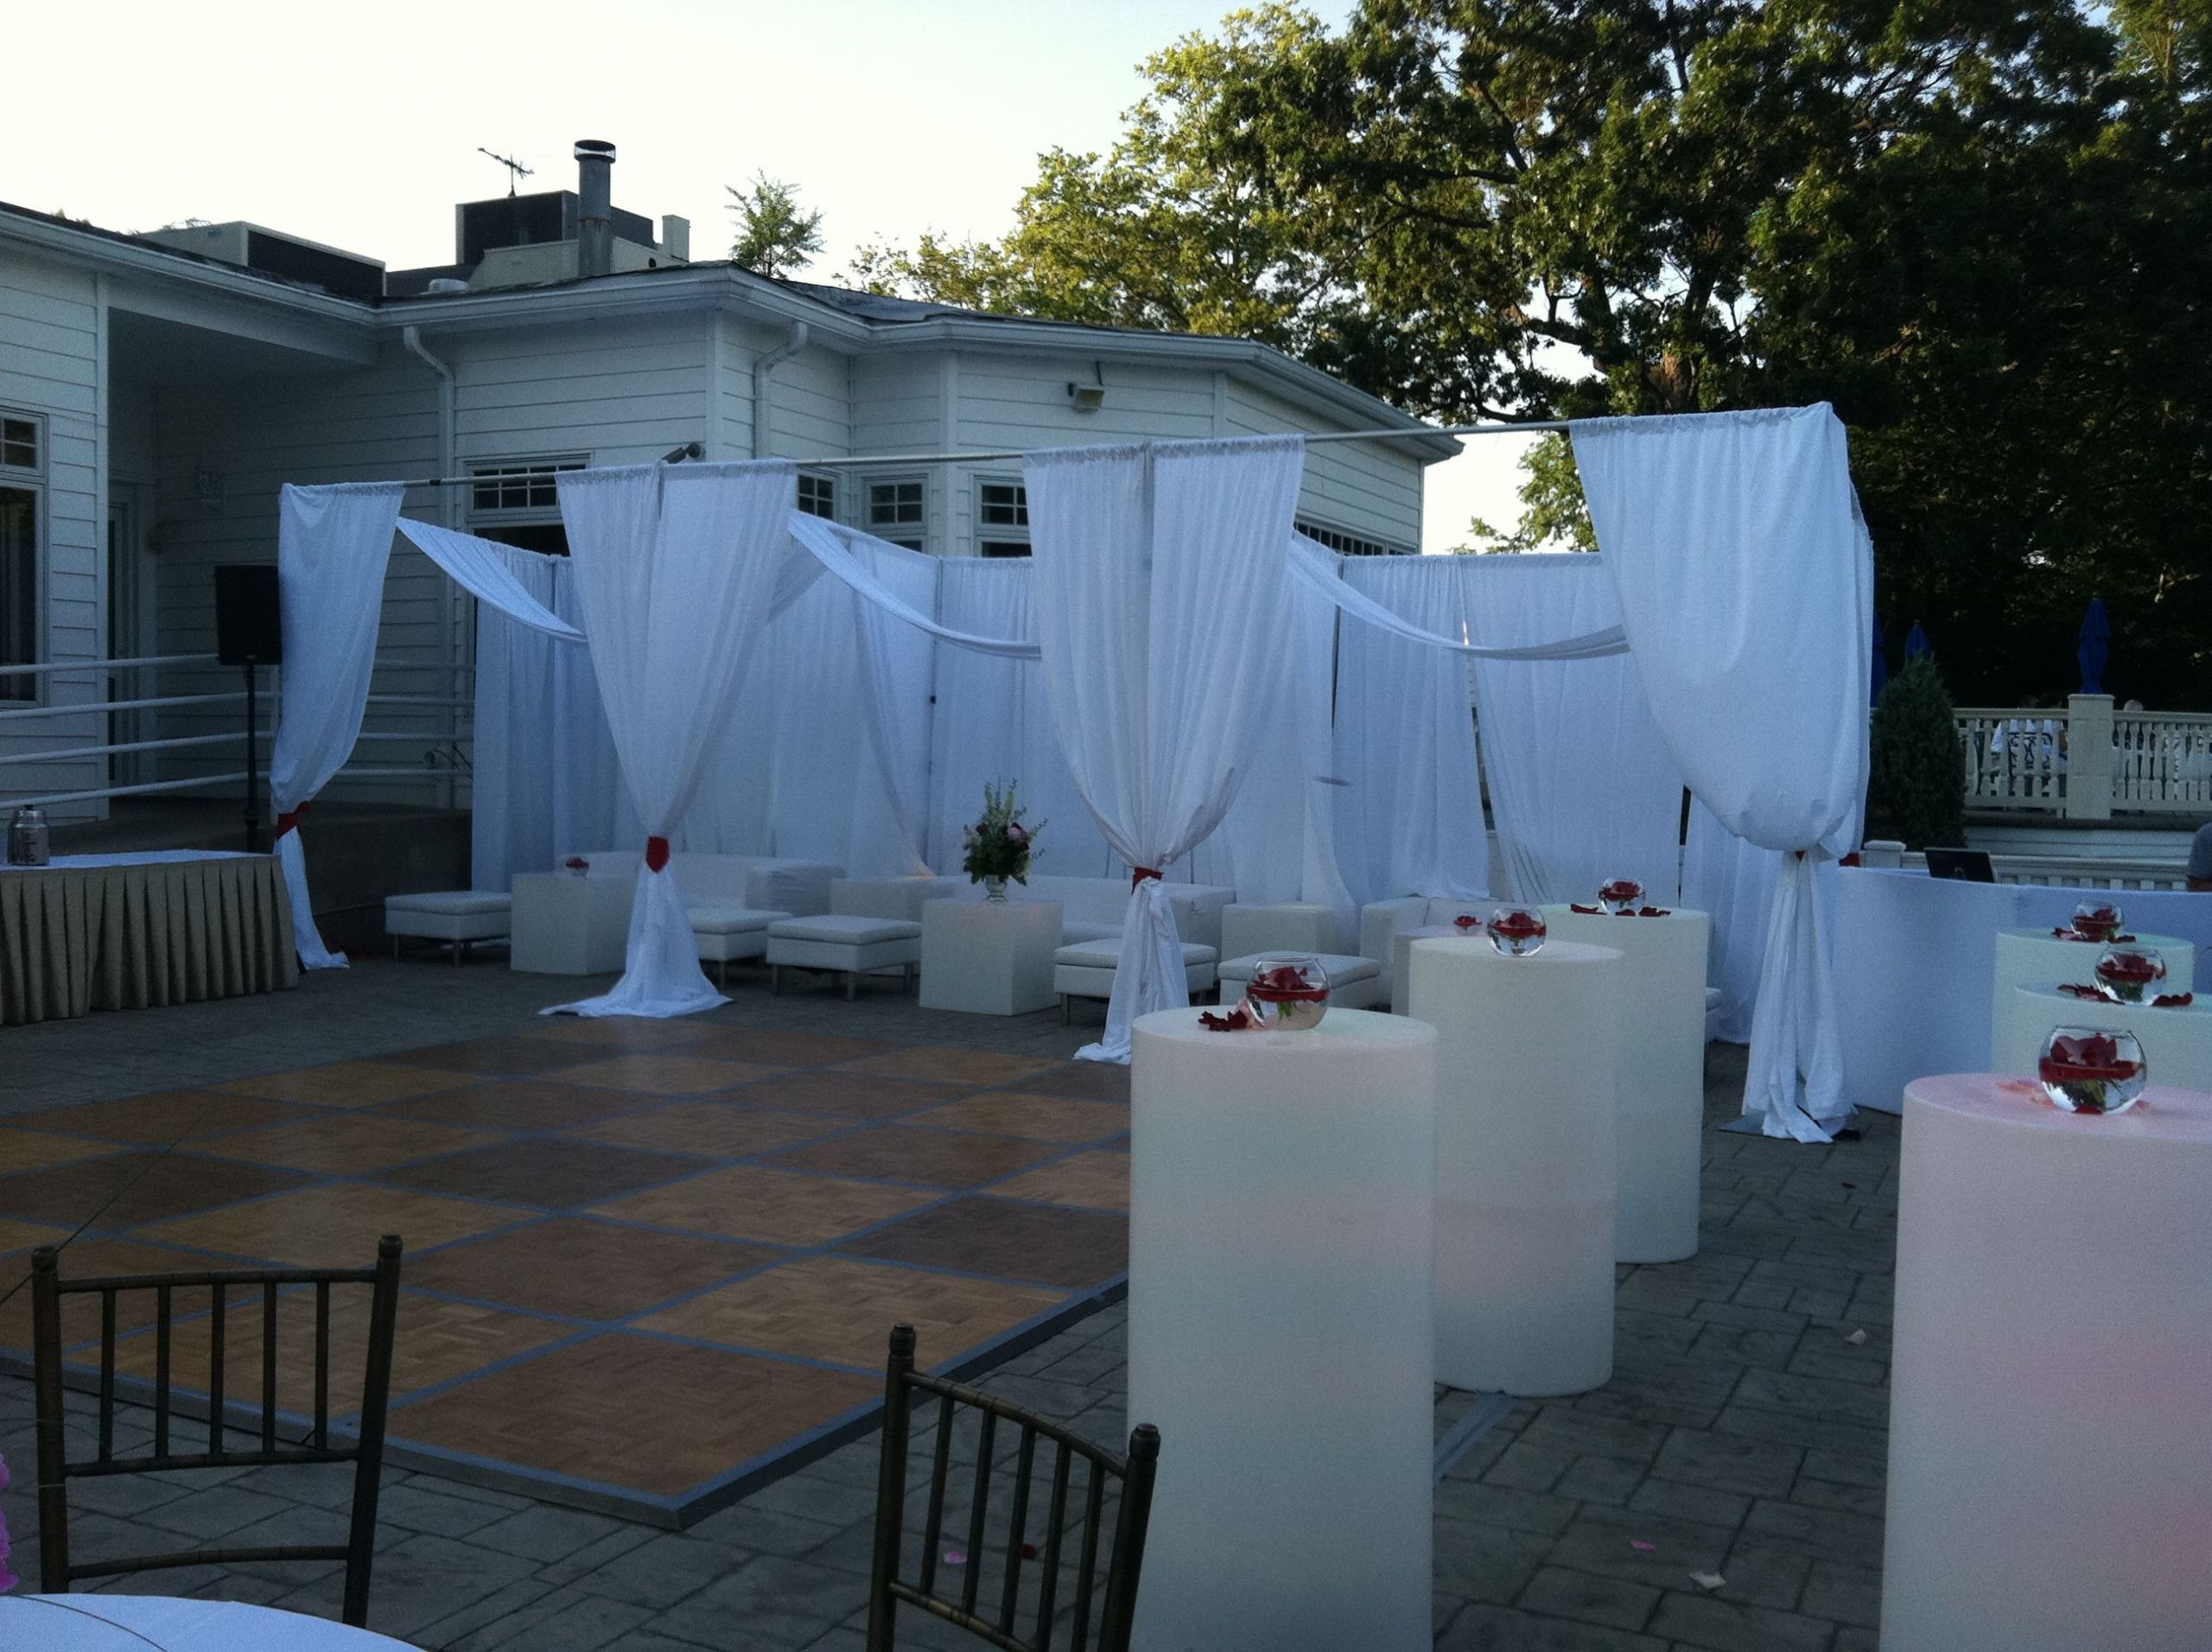 All White Backyard Party Ideas
 looking to have an all white party need ideas wanna rent